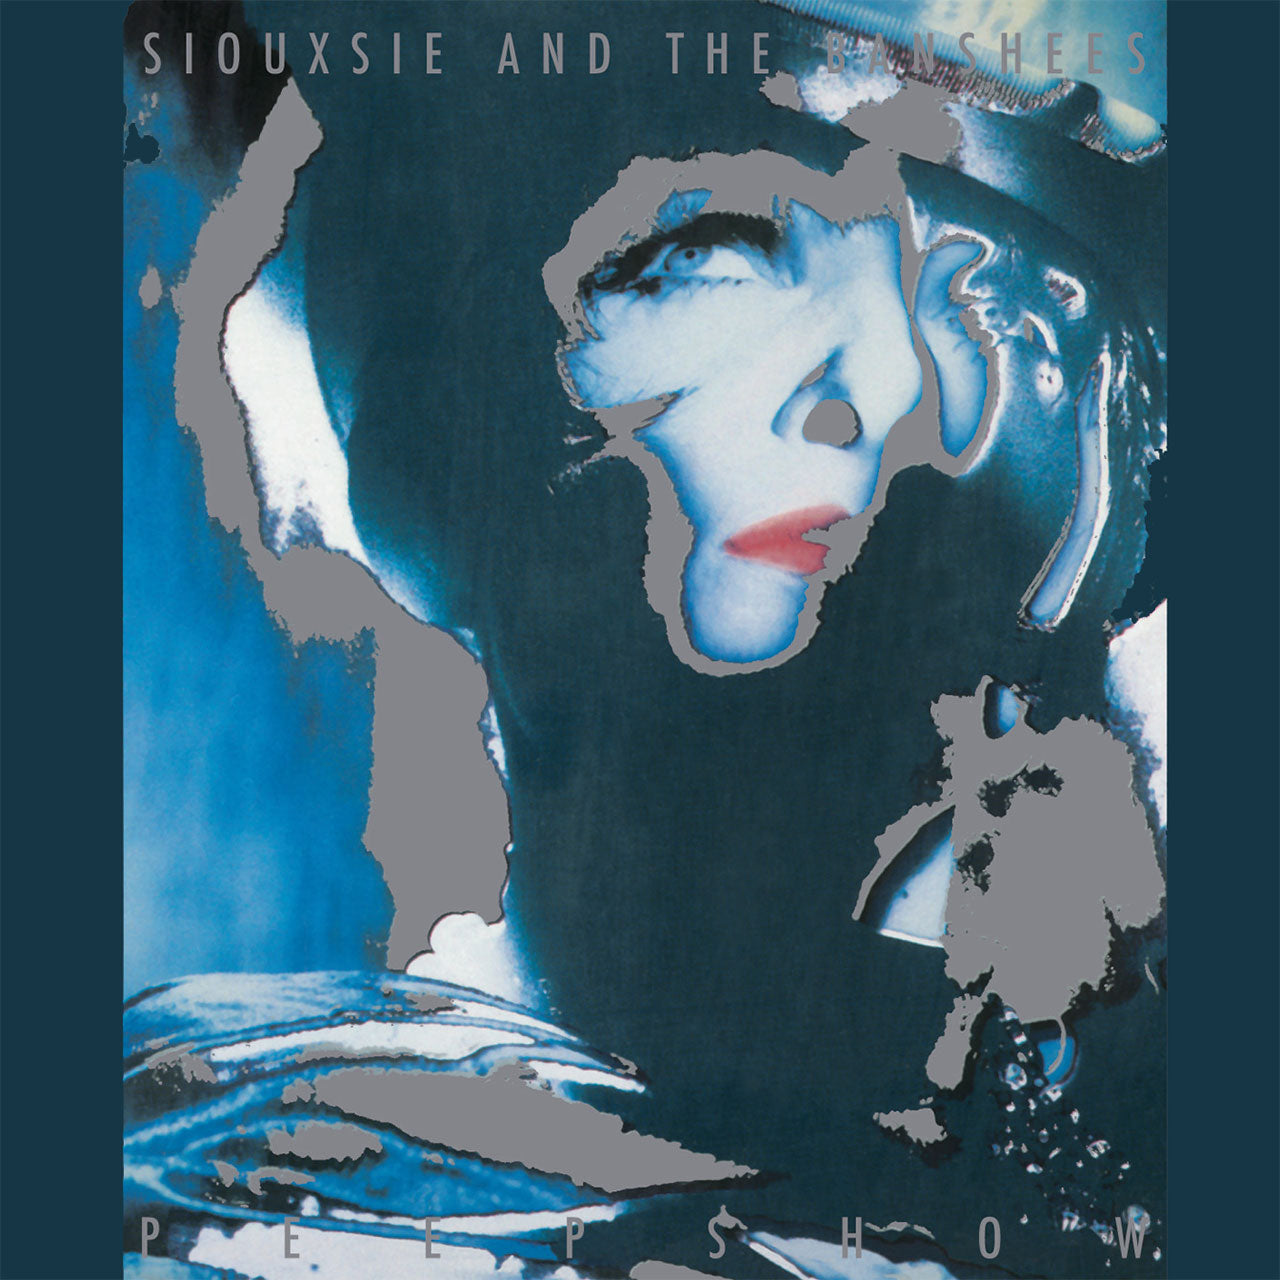 Siouxsie and the Banshees - Peepshow (CD)